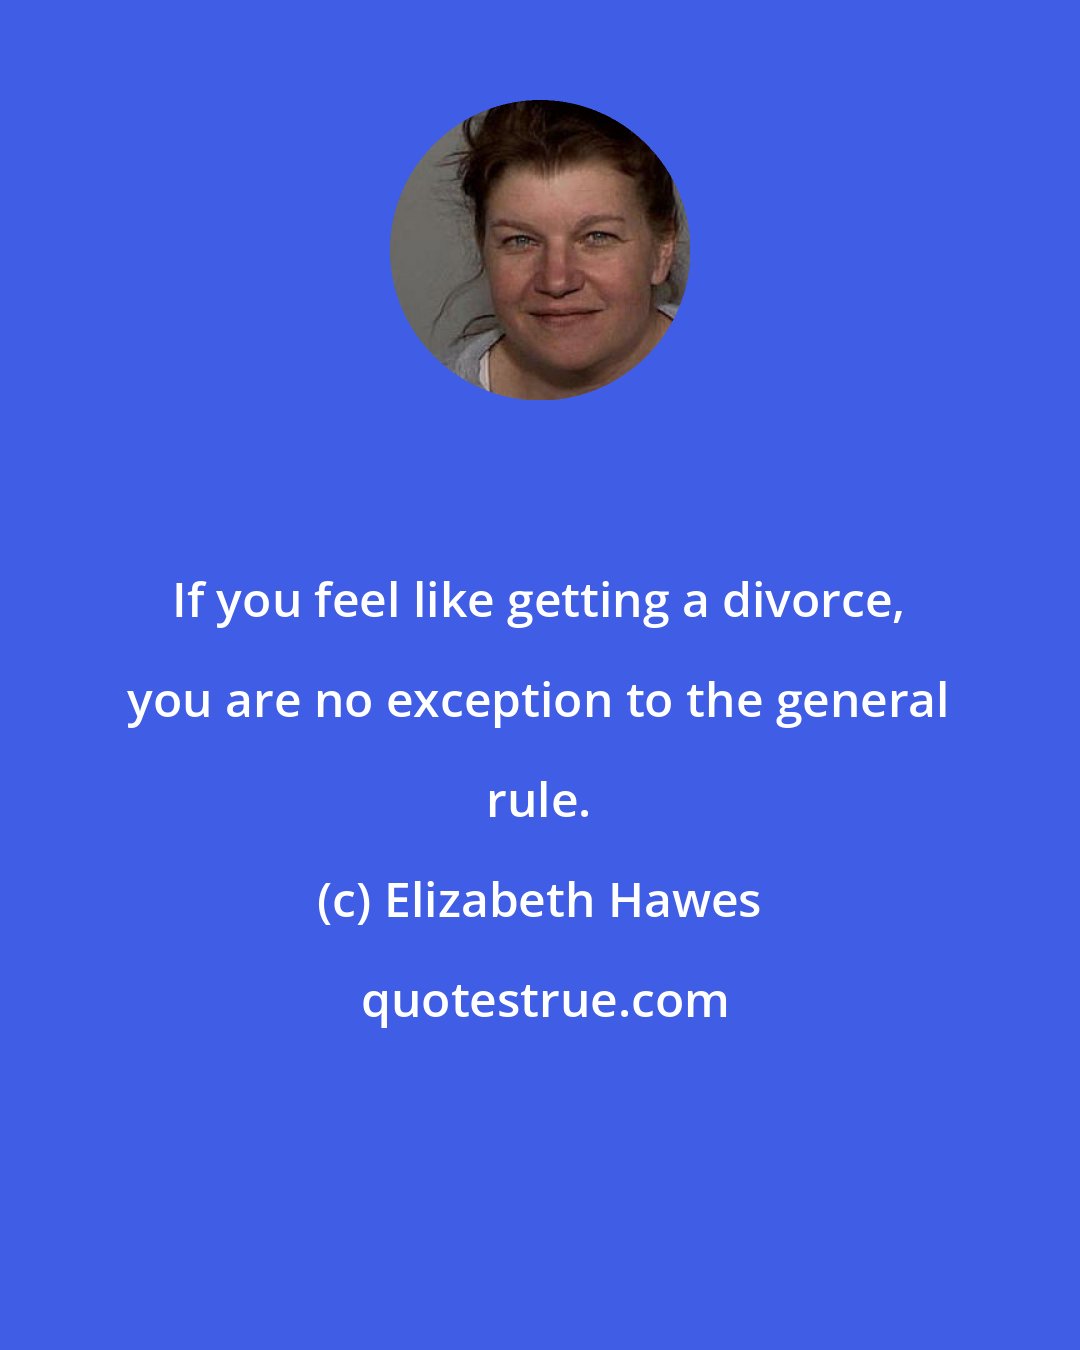 Elizabeth Hawes: If you feel like getting a divorce, you are no exception to the general rule.